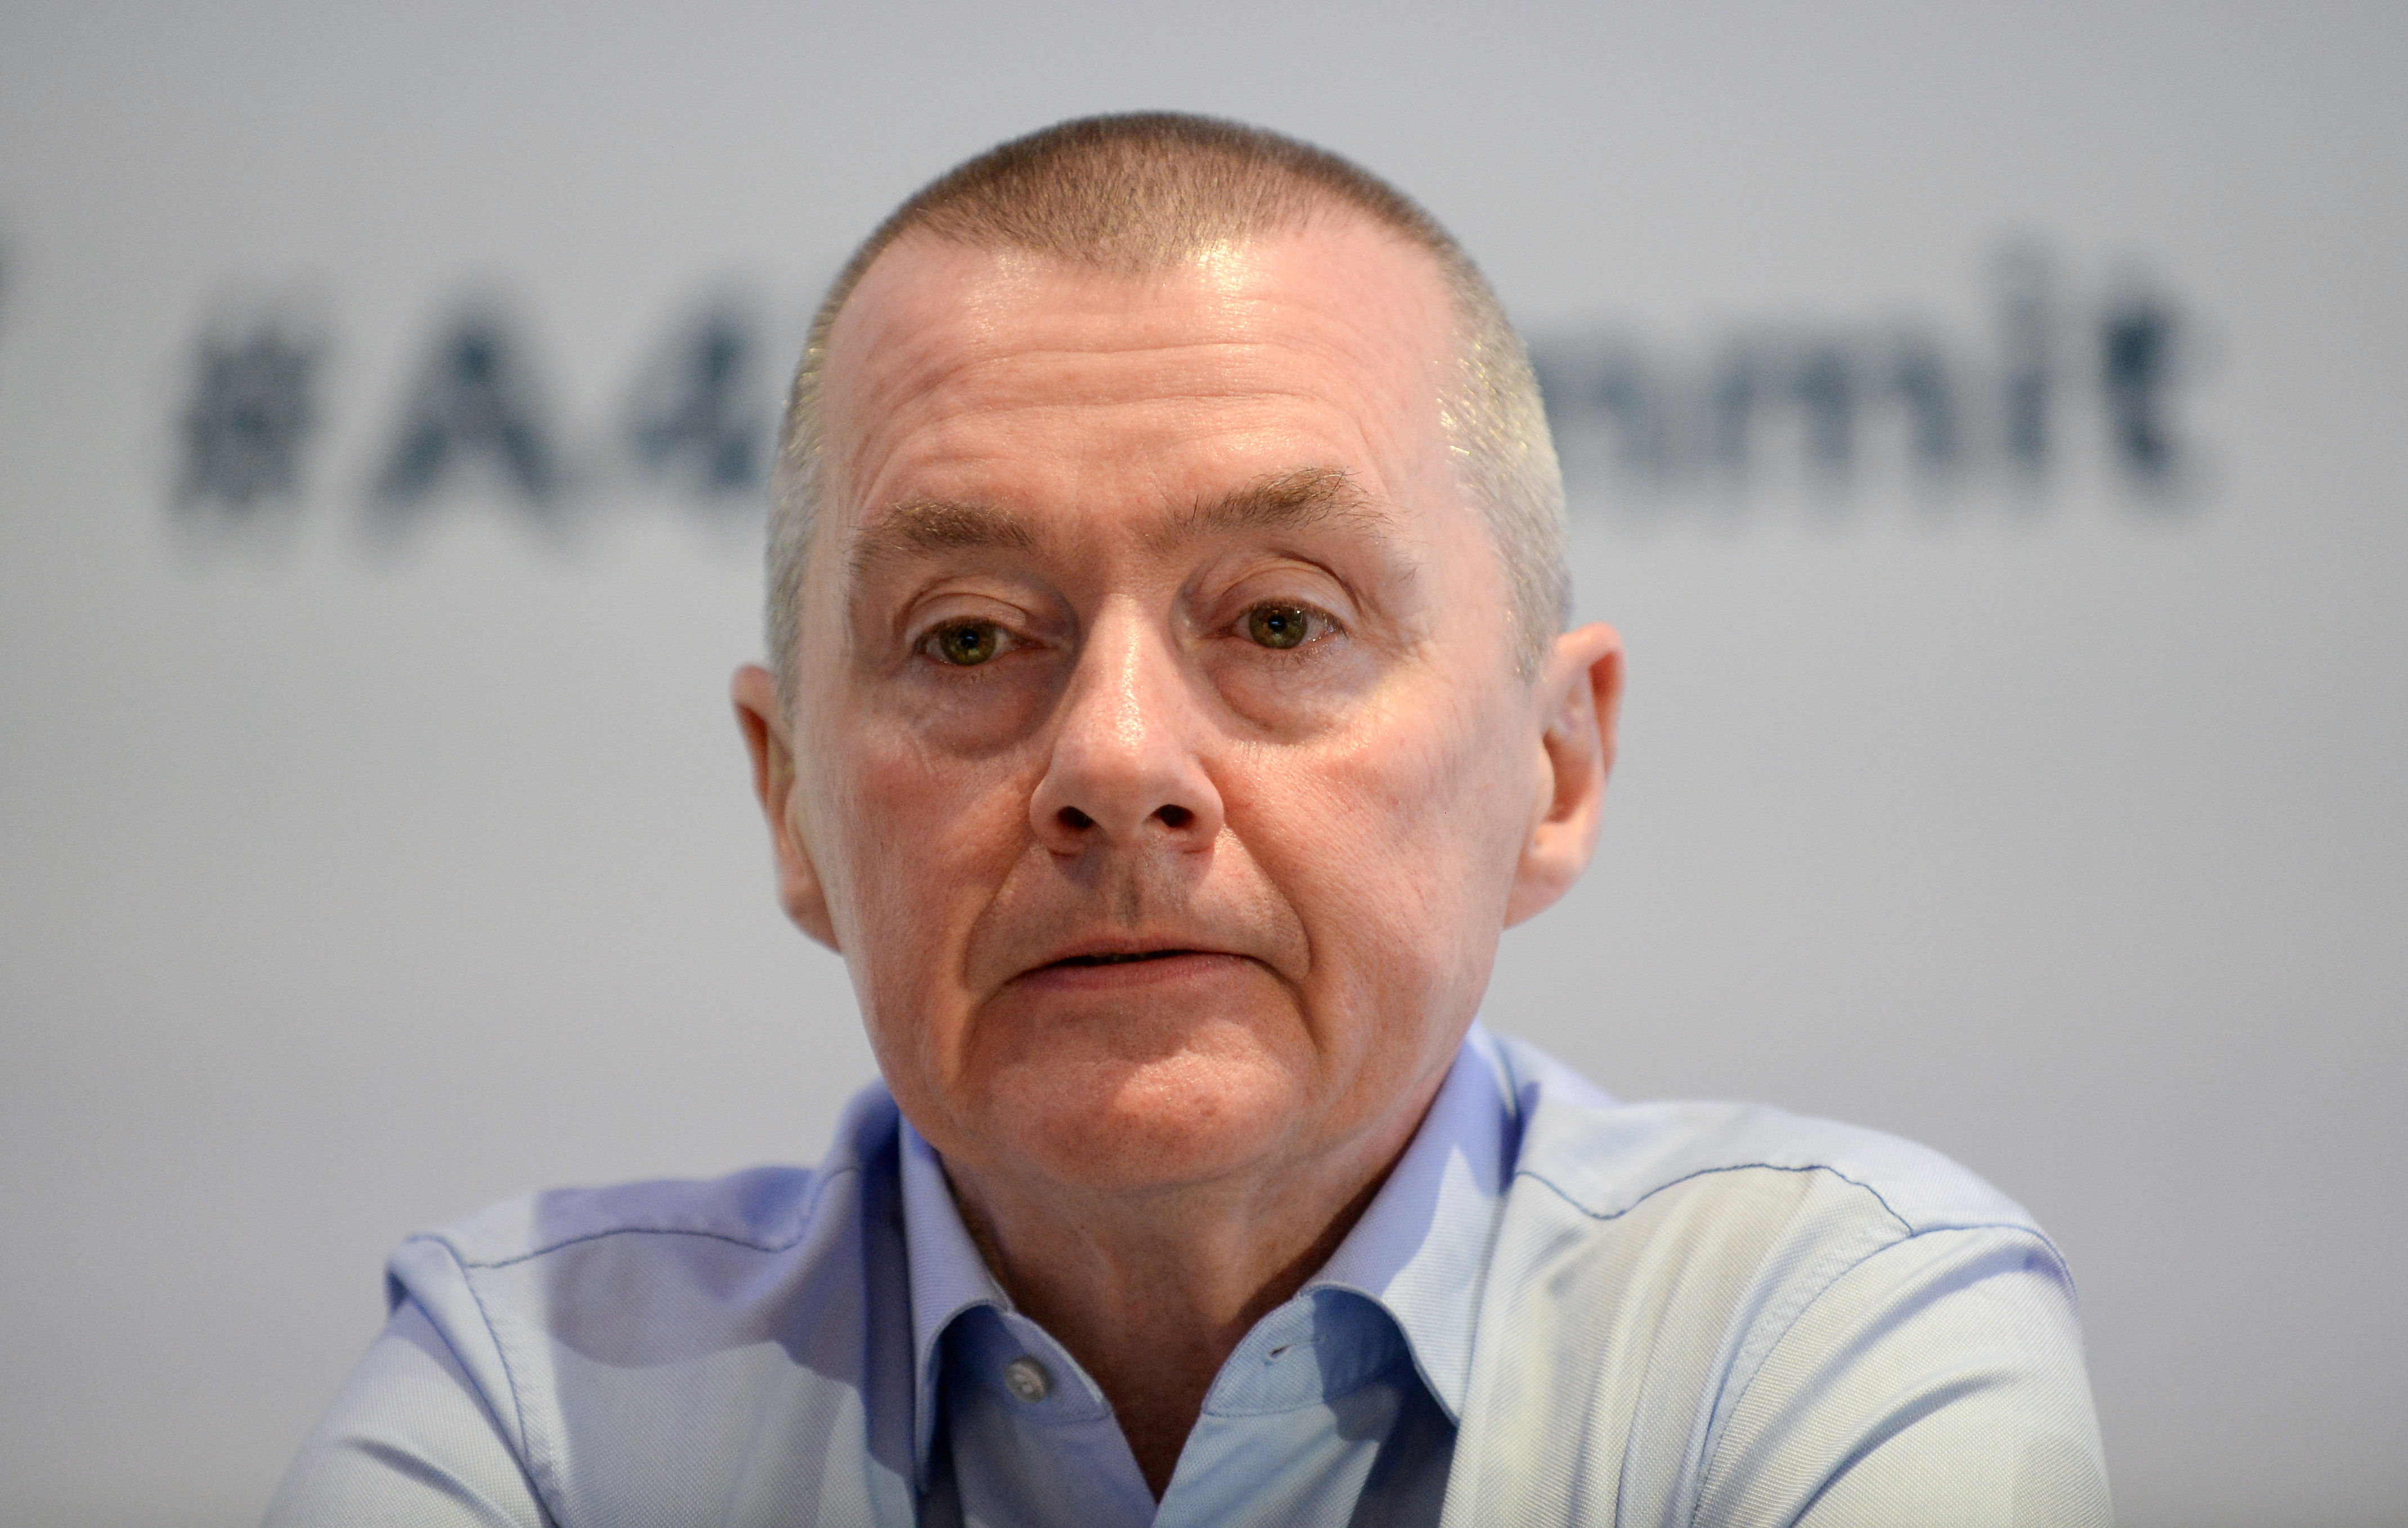 Willie Walsh, head of the International Air Transport Association, attends a meeting in Brussels, Belgium